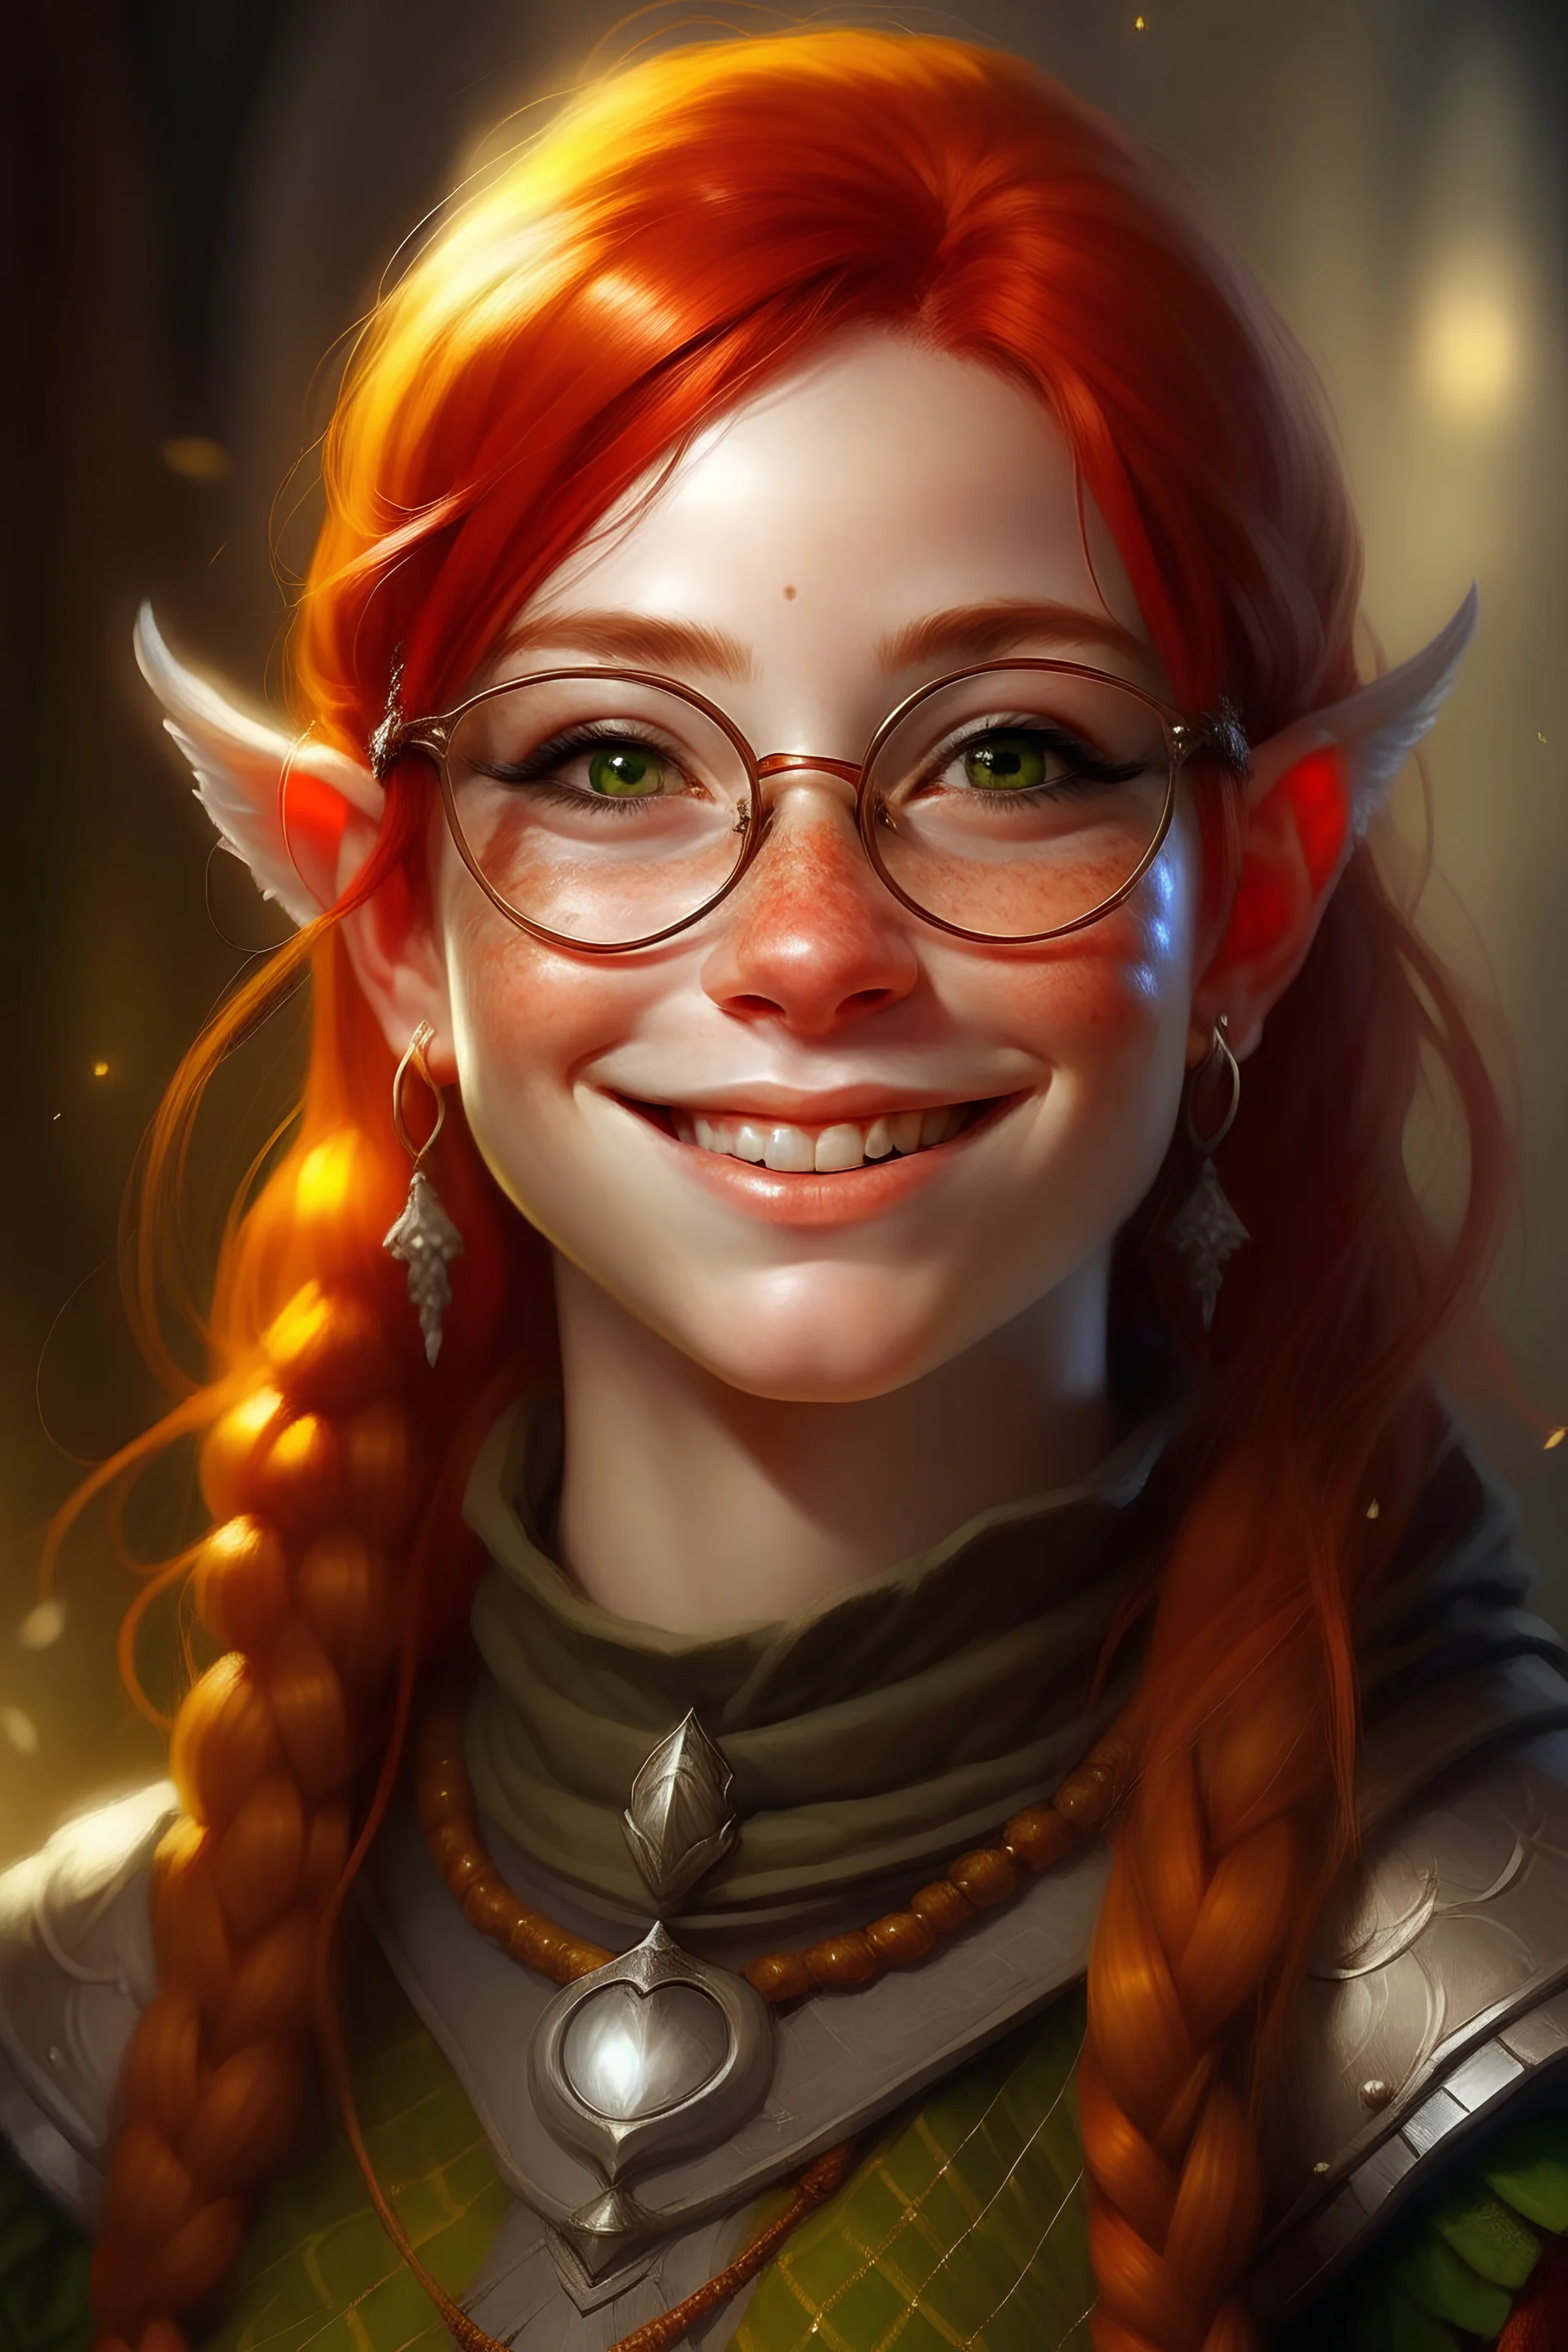 A smiling, young, elf, girl, with bright red hair, freckles, religious cleric, wearing chain mail armor and thick glasses that make her eyes big and pointed ears